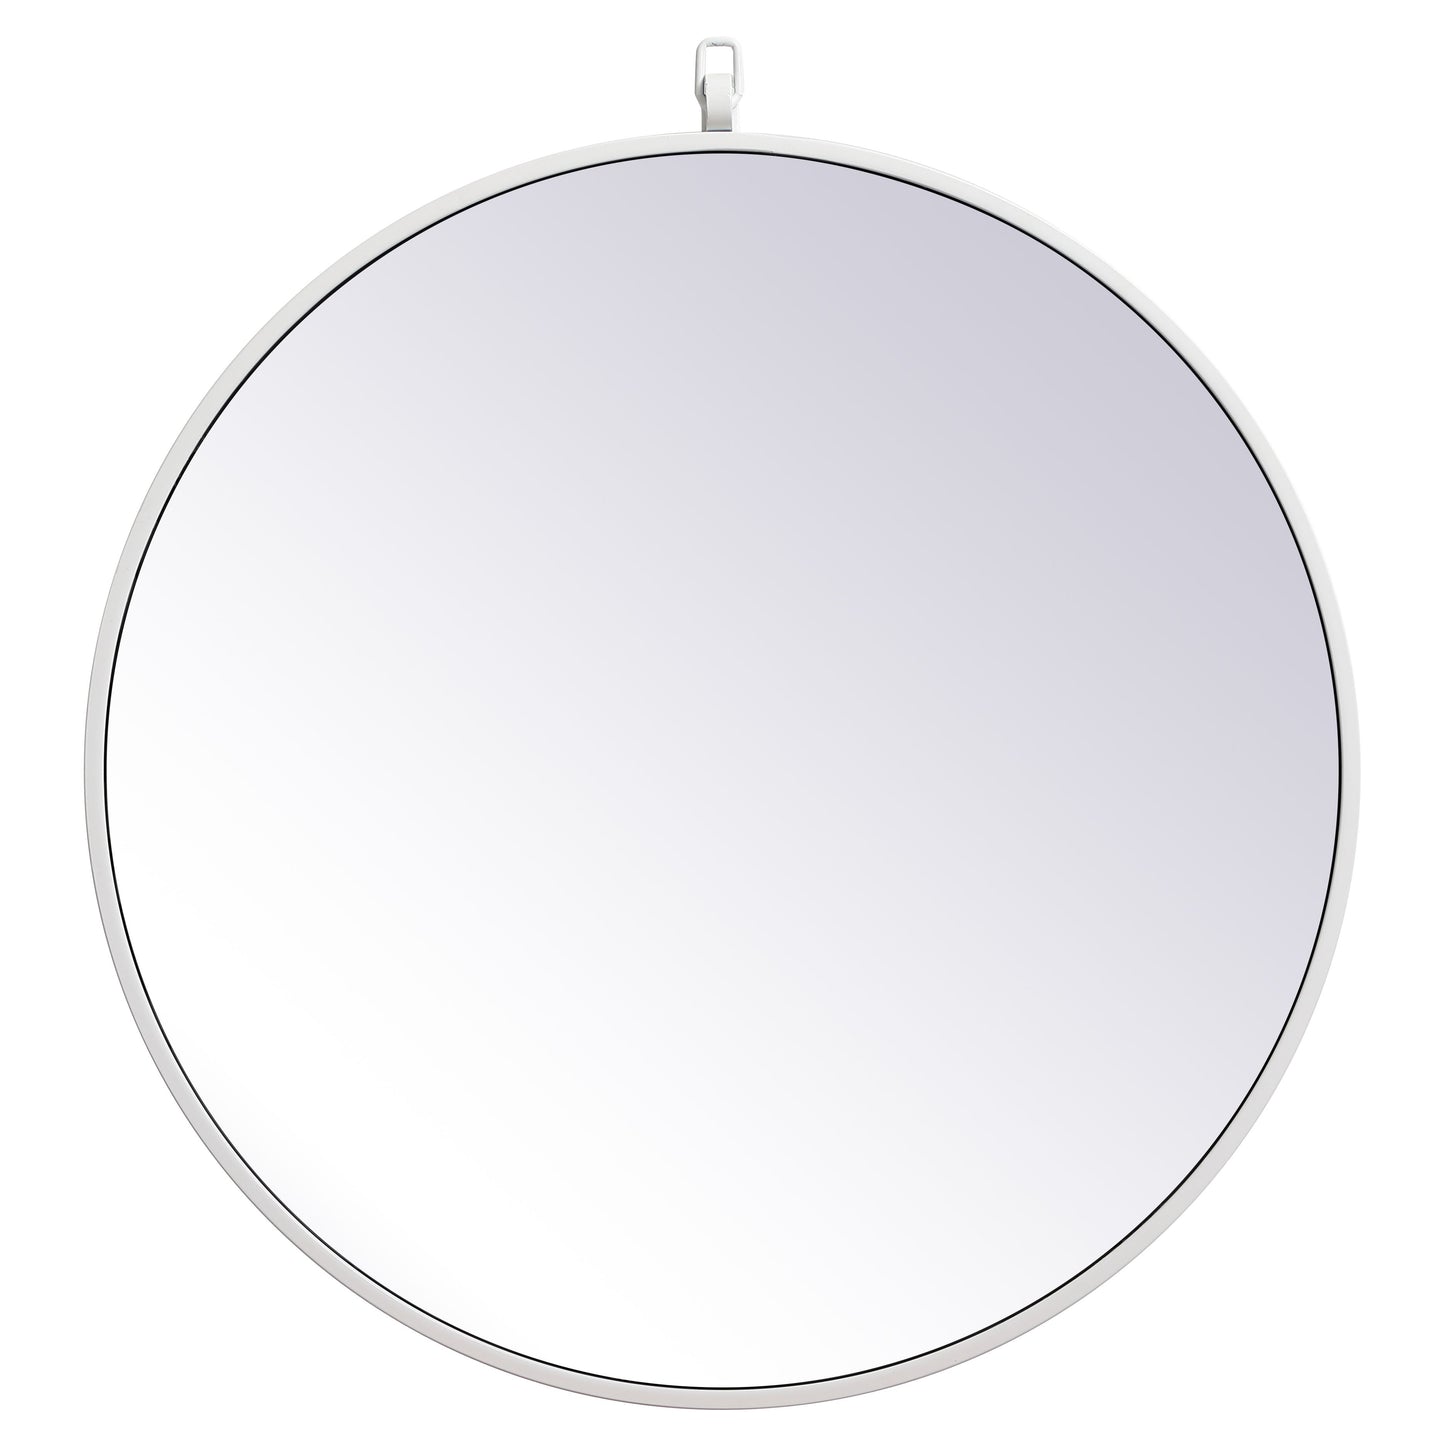 MR4051WH Rowan 24" x 24" Metal Framed Round Mirror with Decorative Hook in White